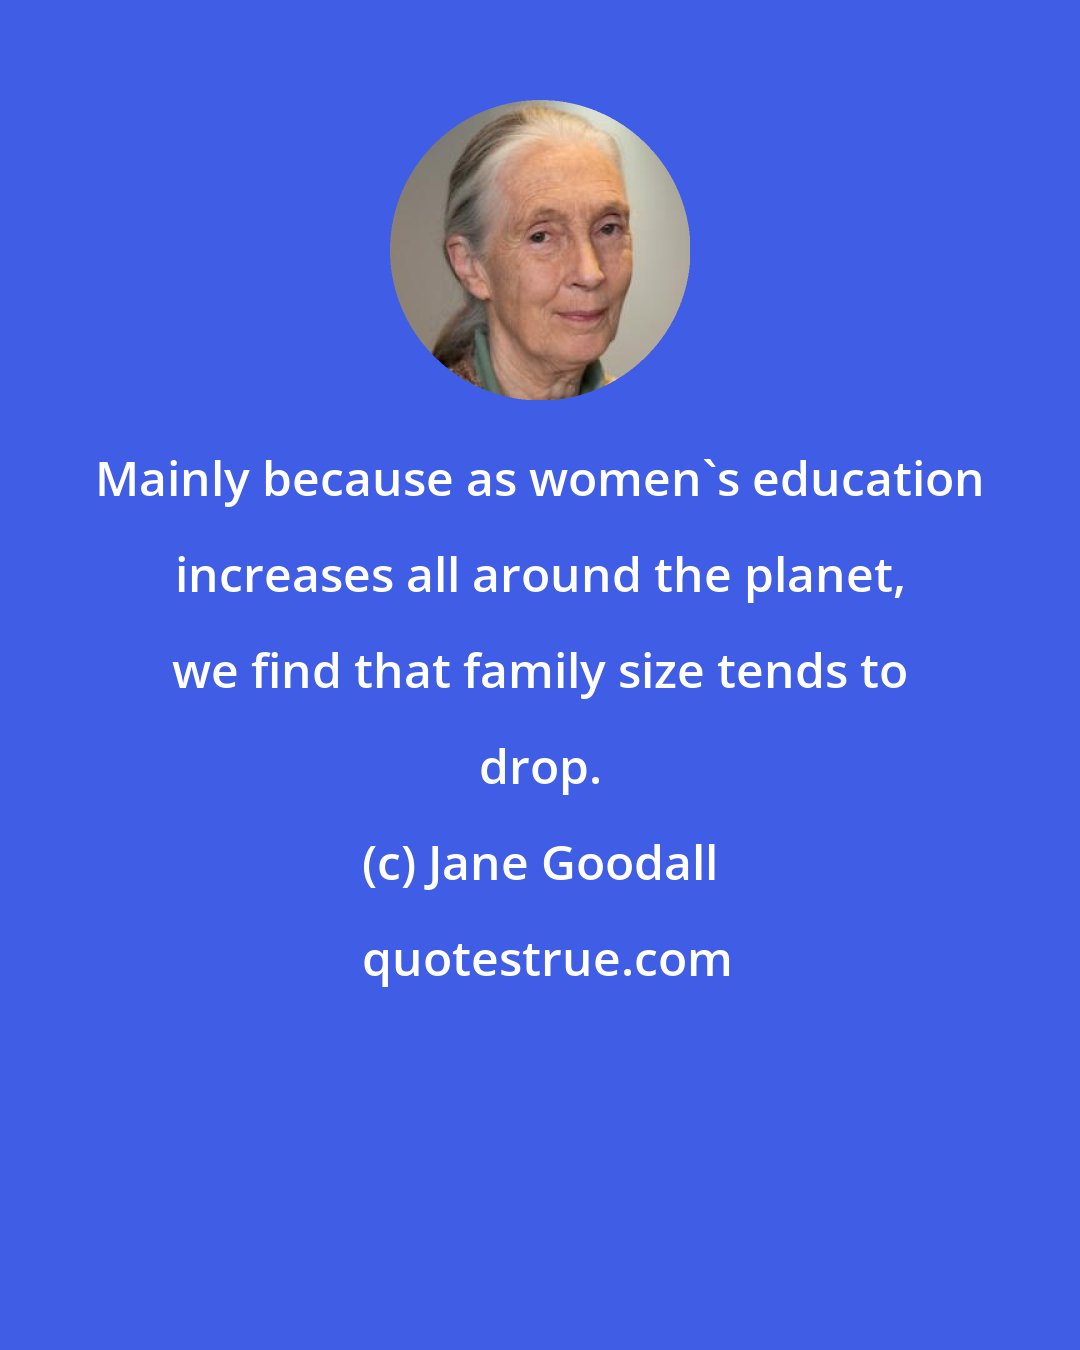 Jane Goodall: Mainly because as women's education increases all around the planet, we find that family size tends to drop.